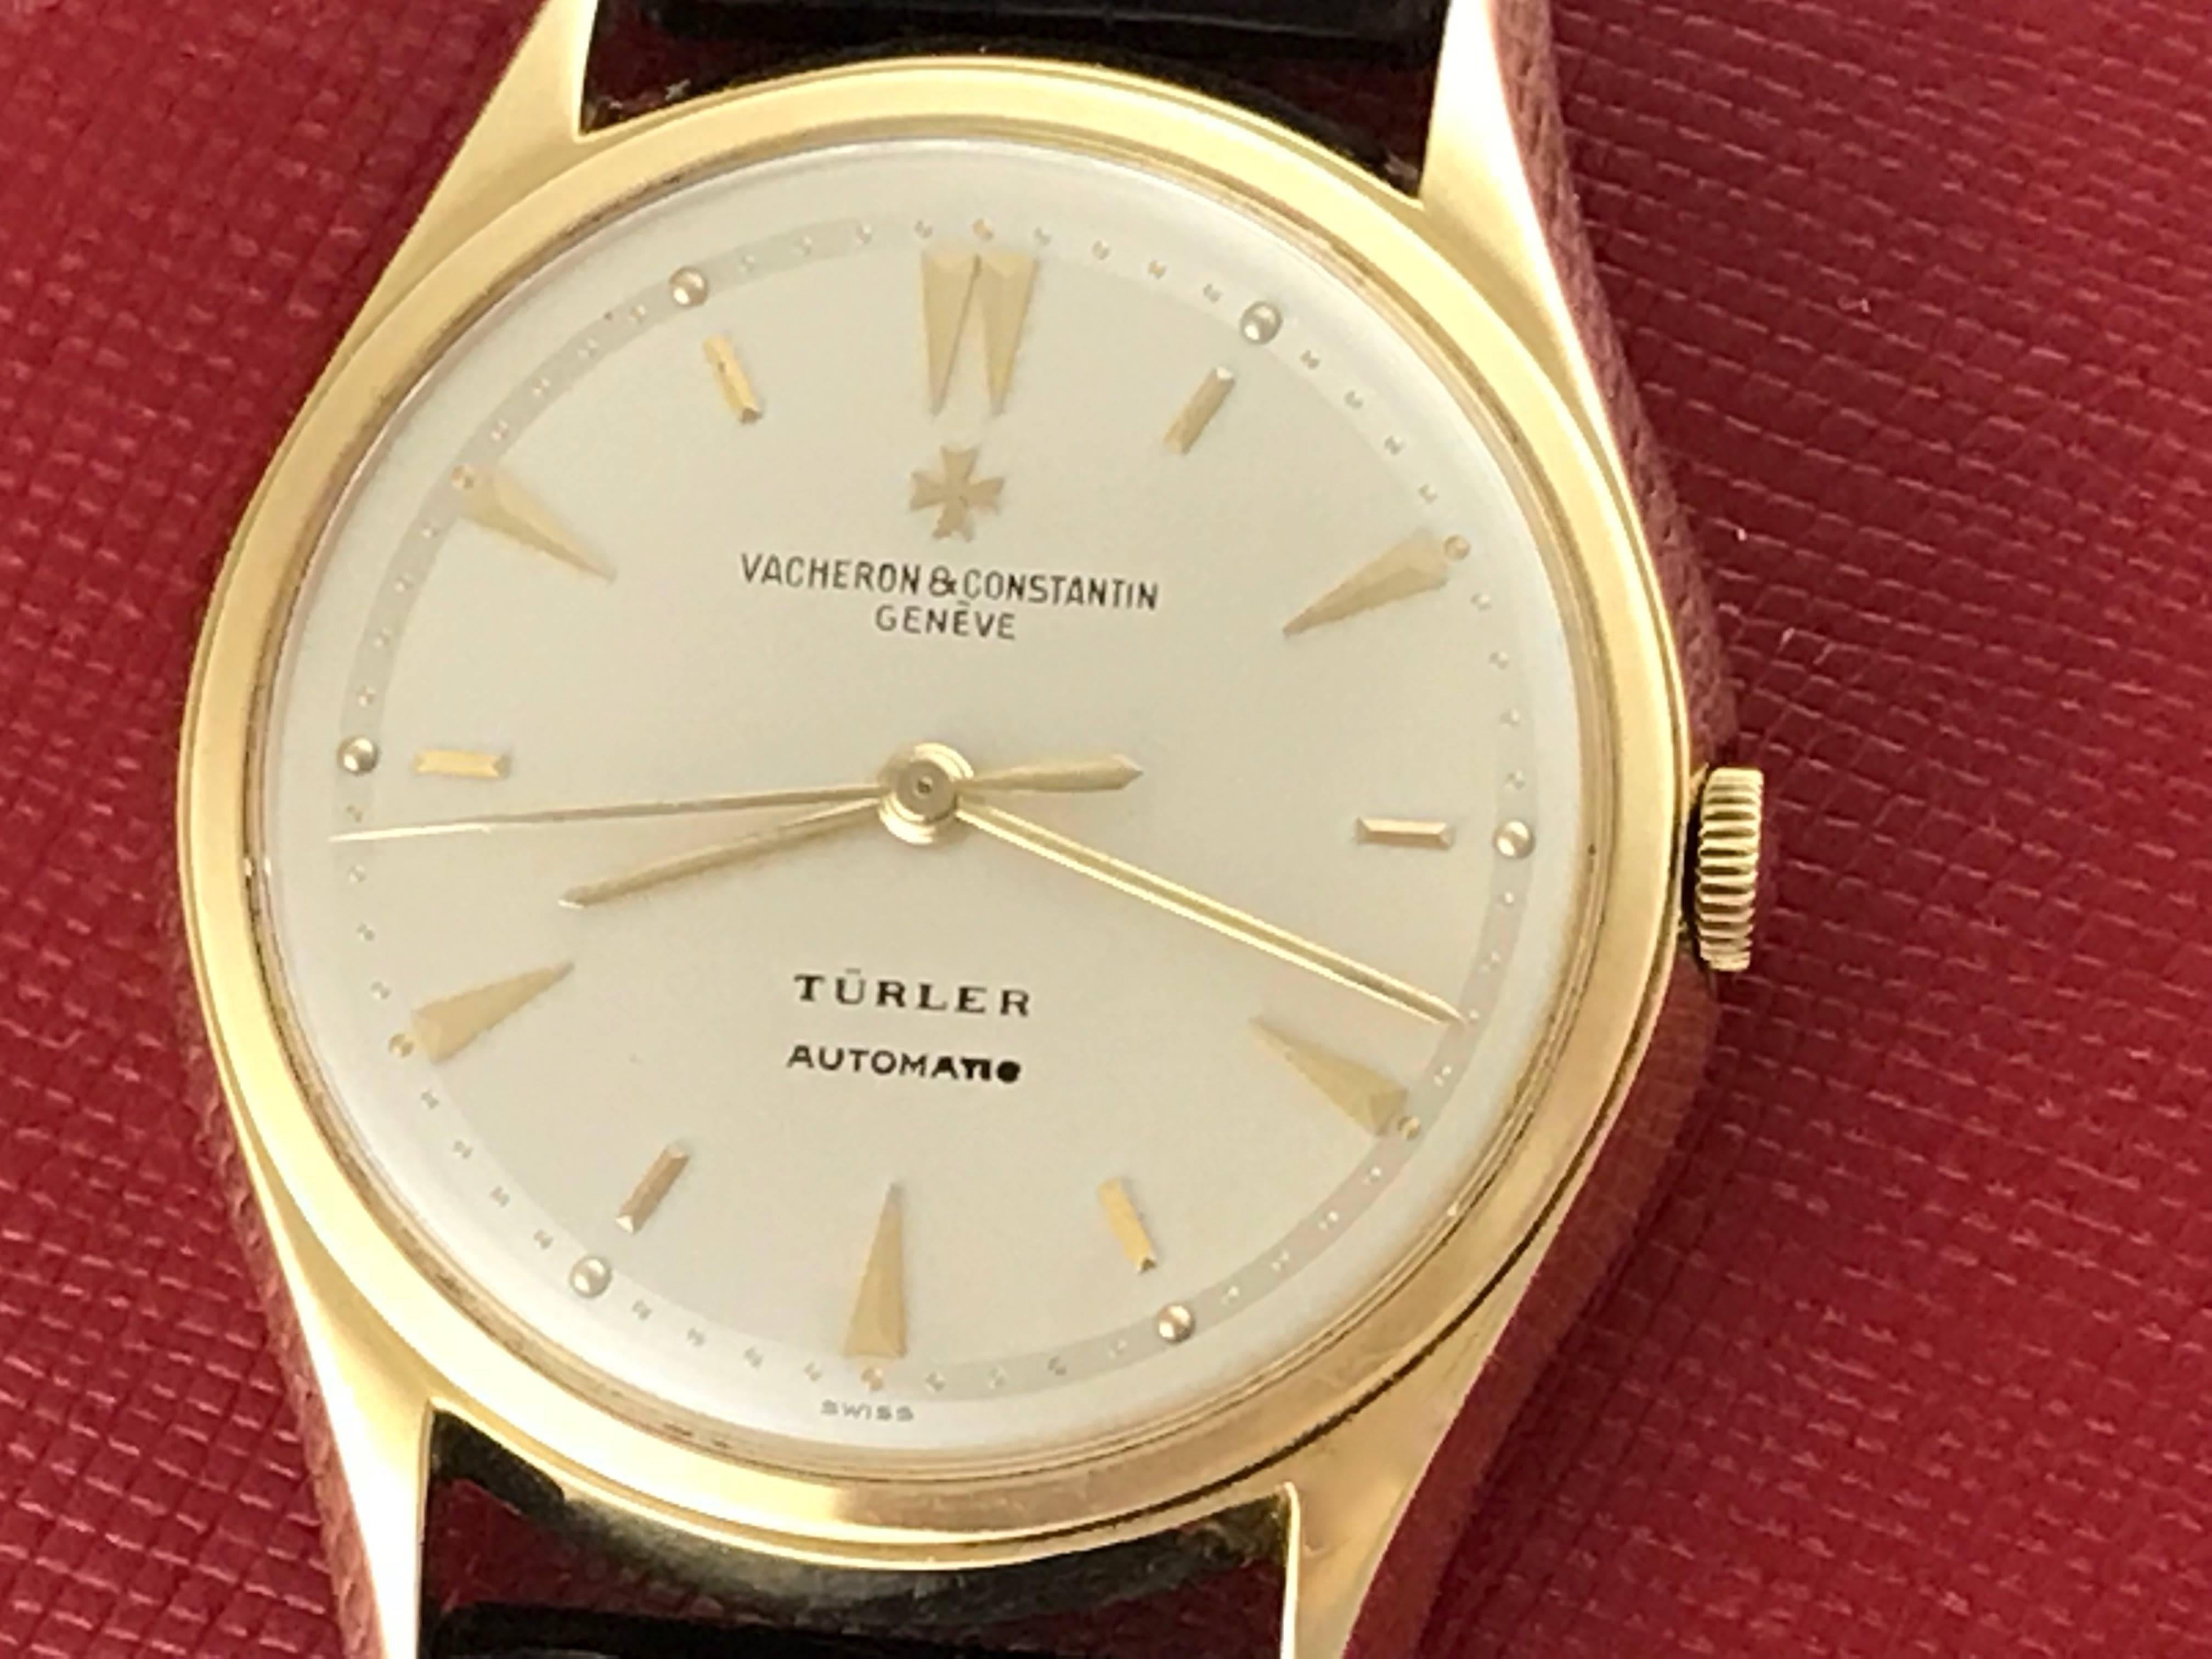 Vacheron Constantin Turler, Model 4906 certified pre-owned men's automatic wrist watch. Vacheron Constantin Caliber P1019/2 Automatic Winding Movement with 21 Jewels. Silvered Dial with gold hour markers. Signed: 